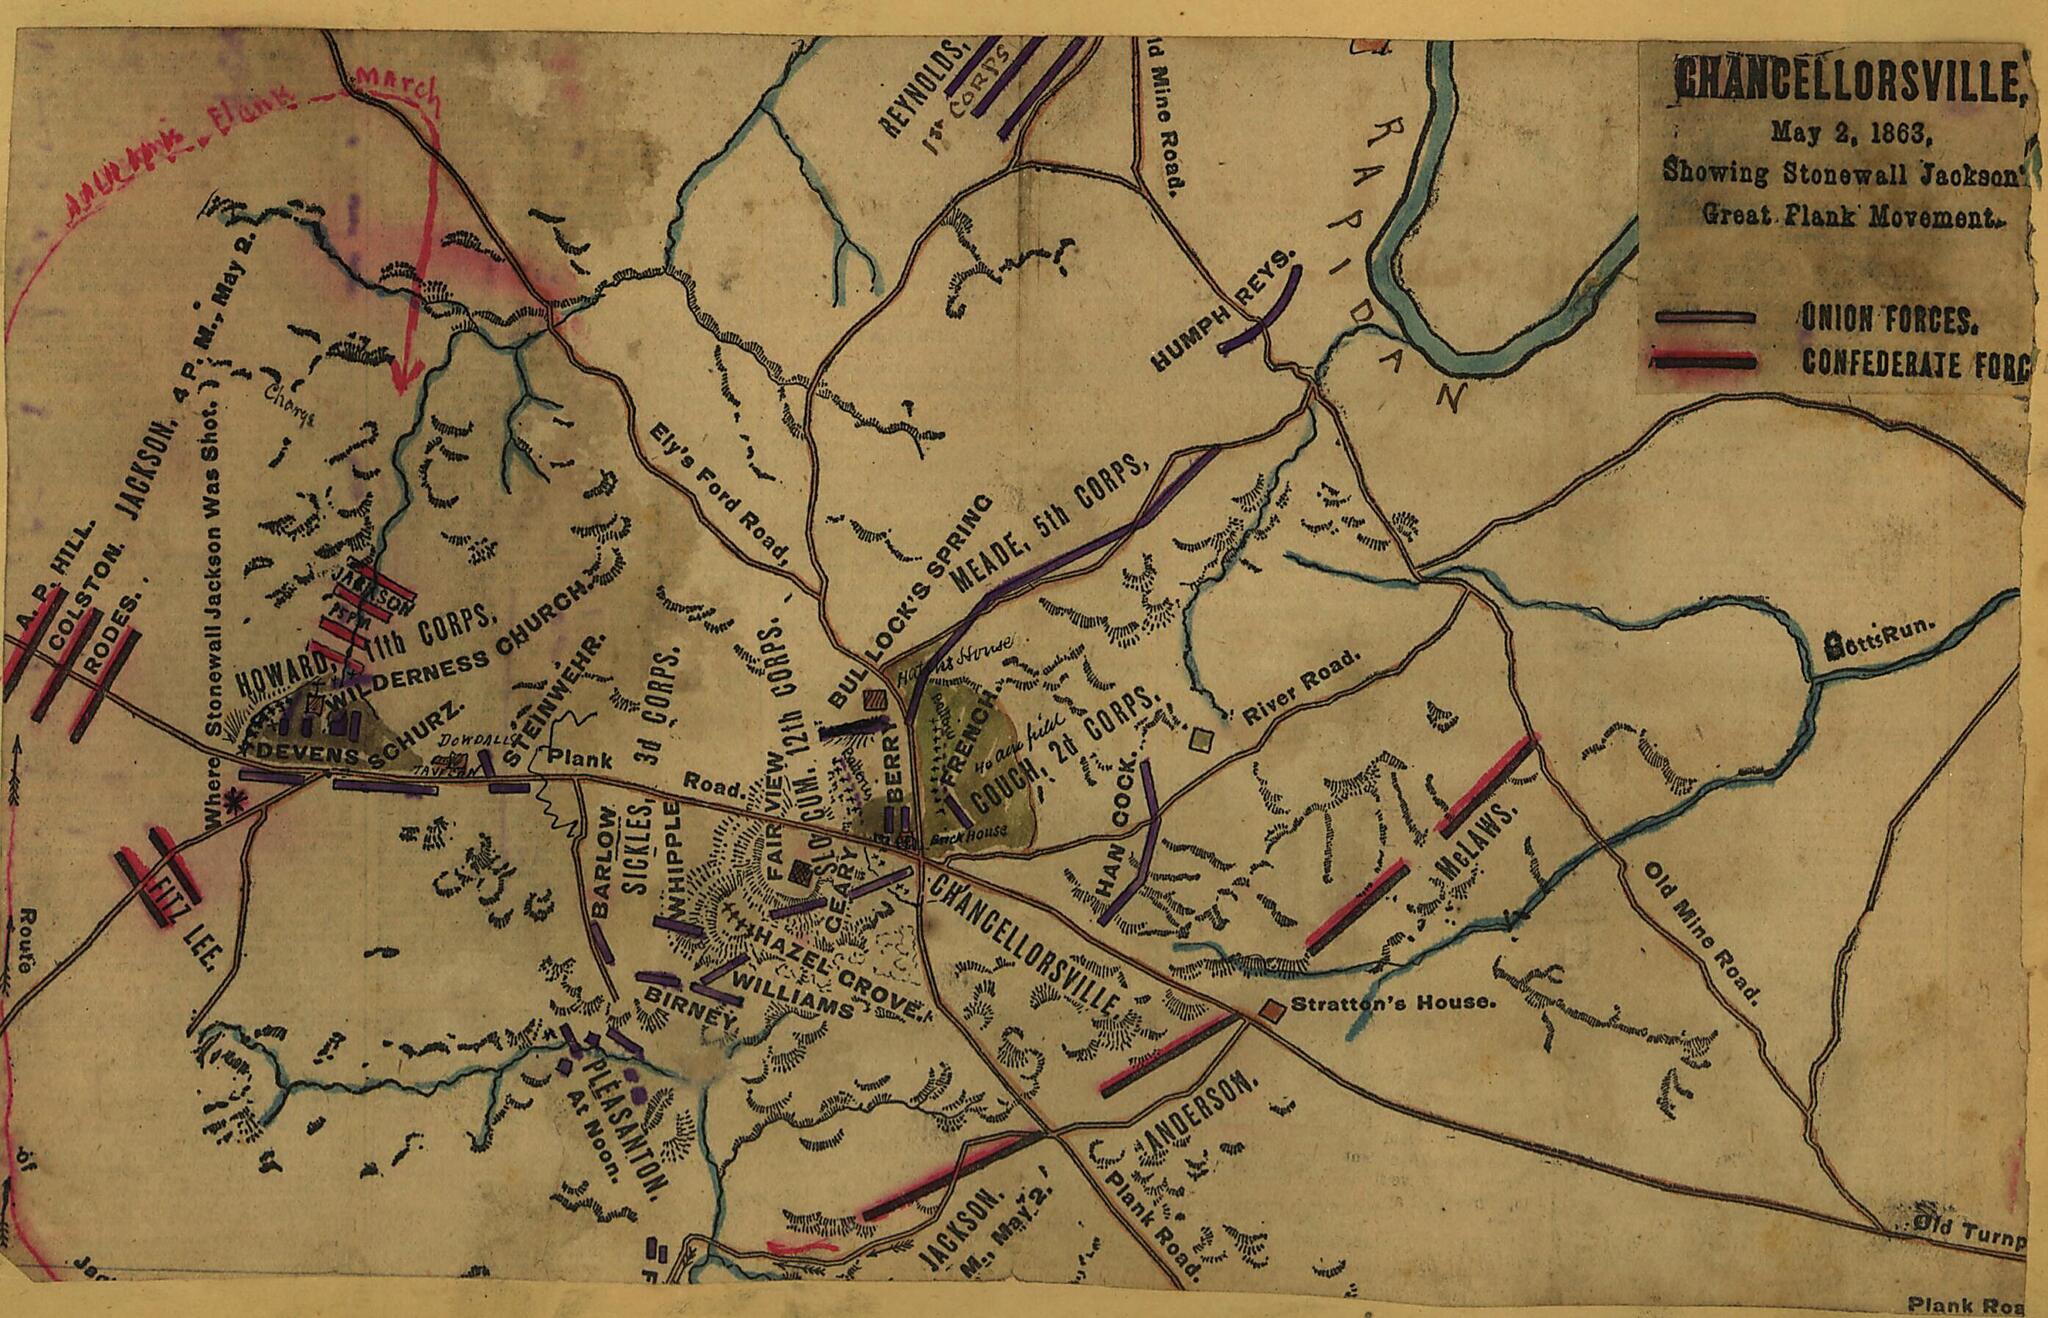 This old map of Chancellorsville, May 2, 1863, Showing Stonewall Jackson&